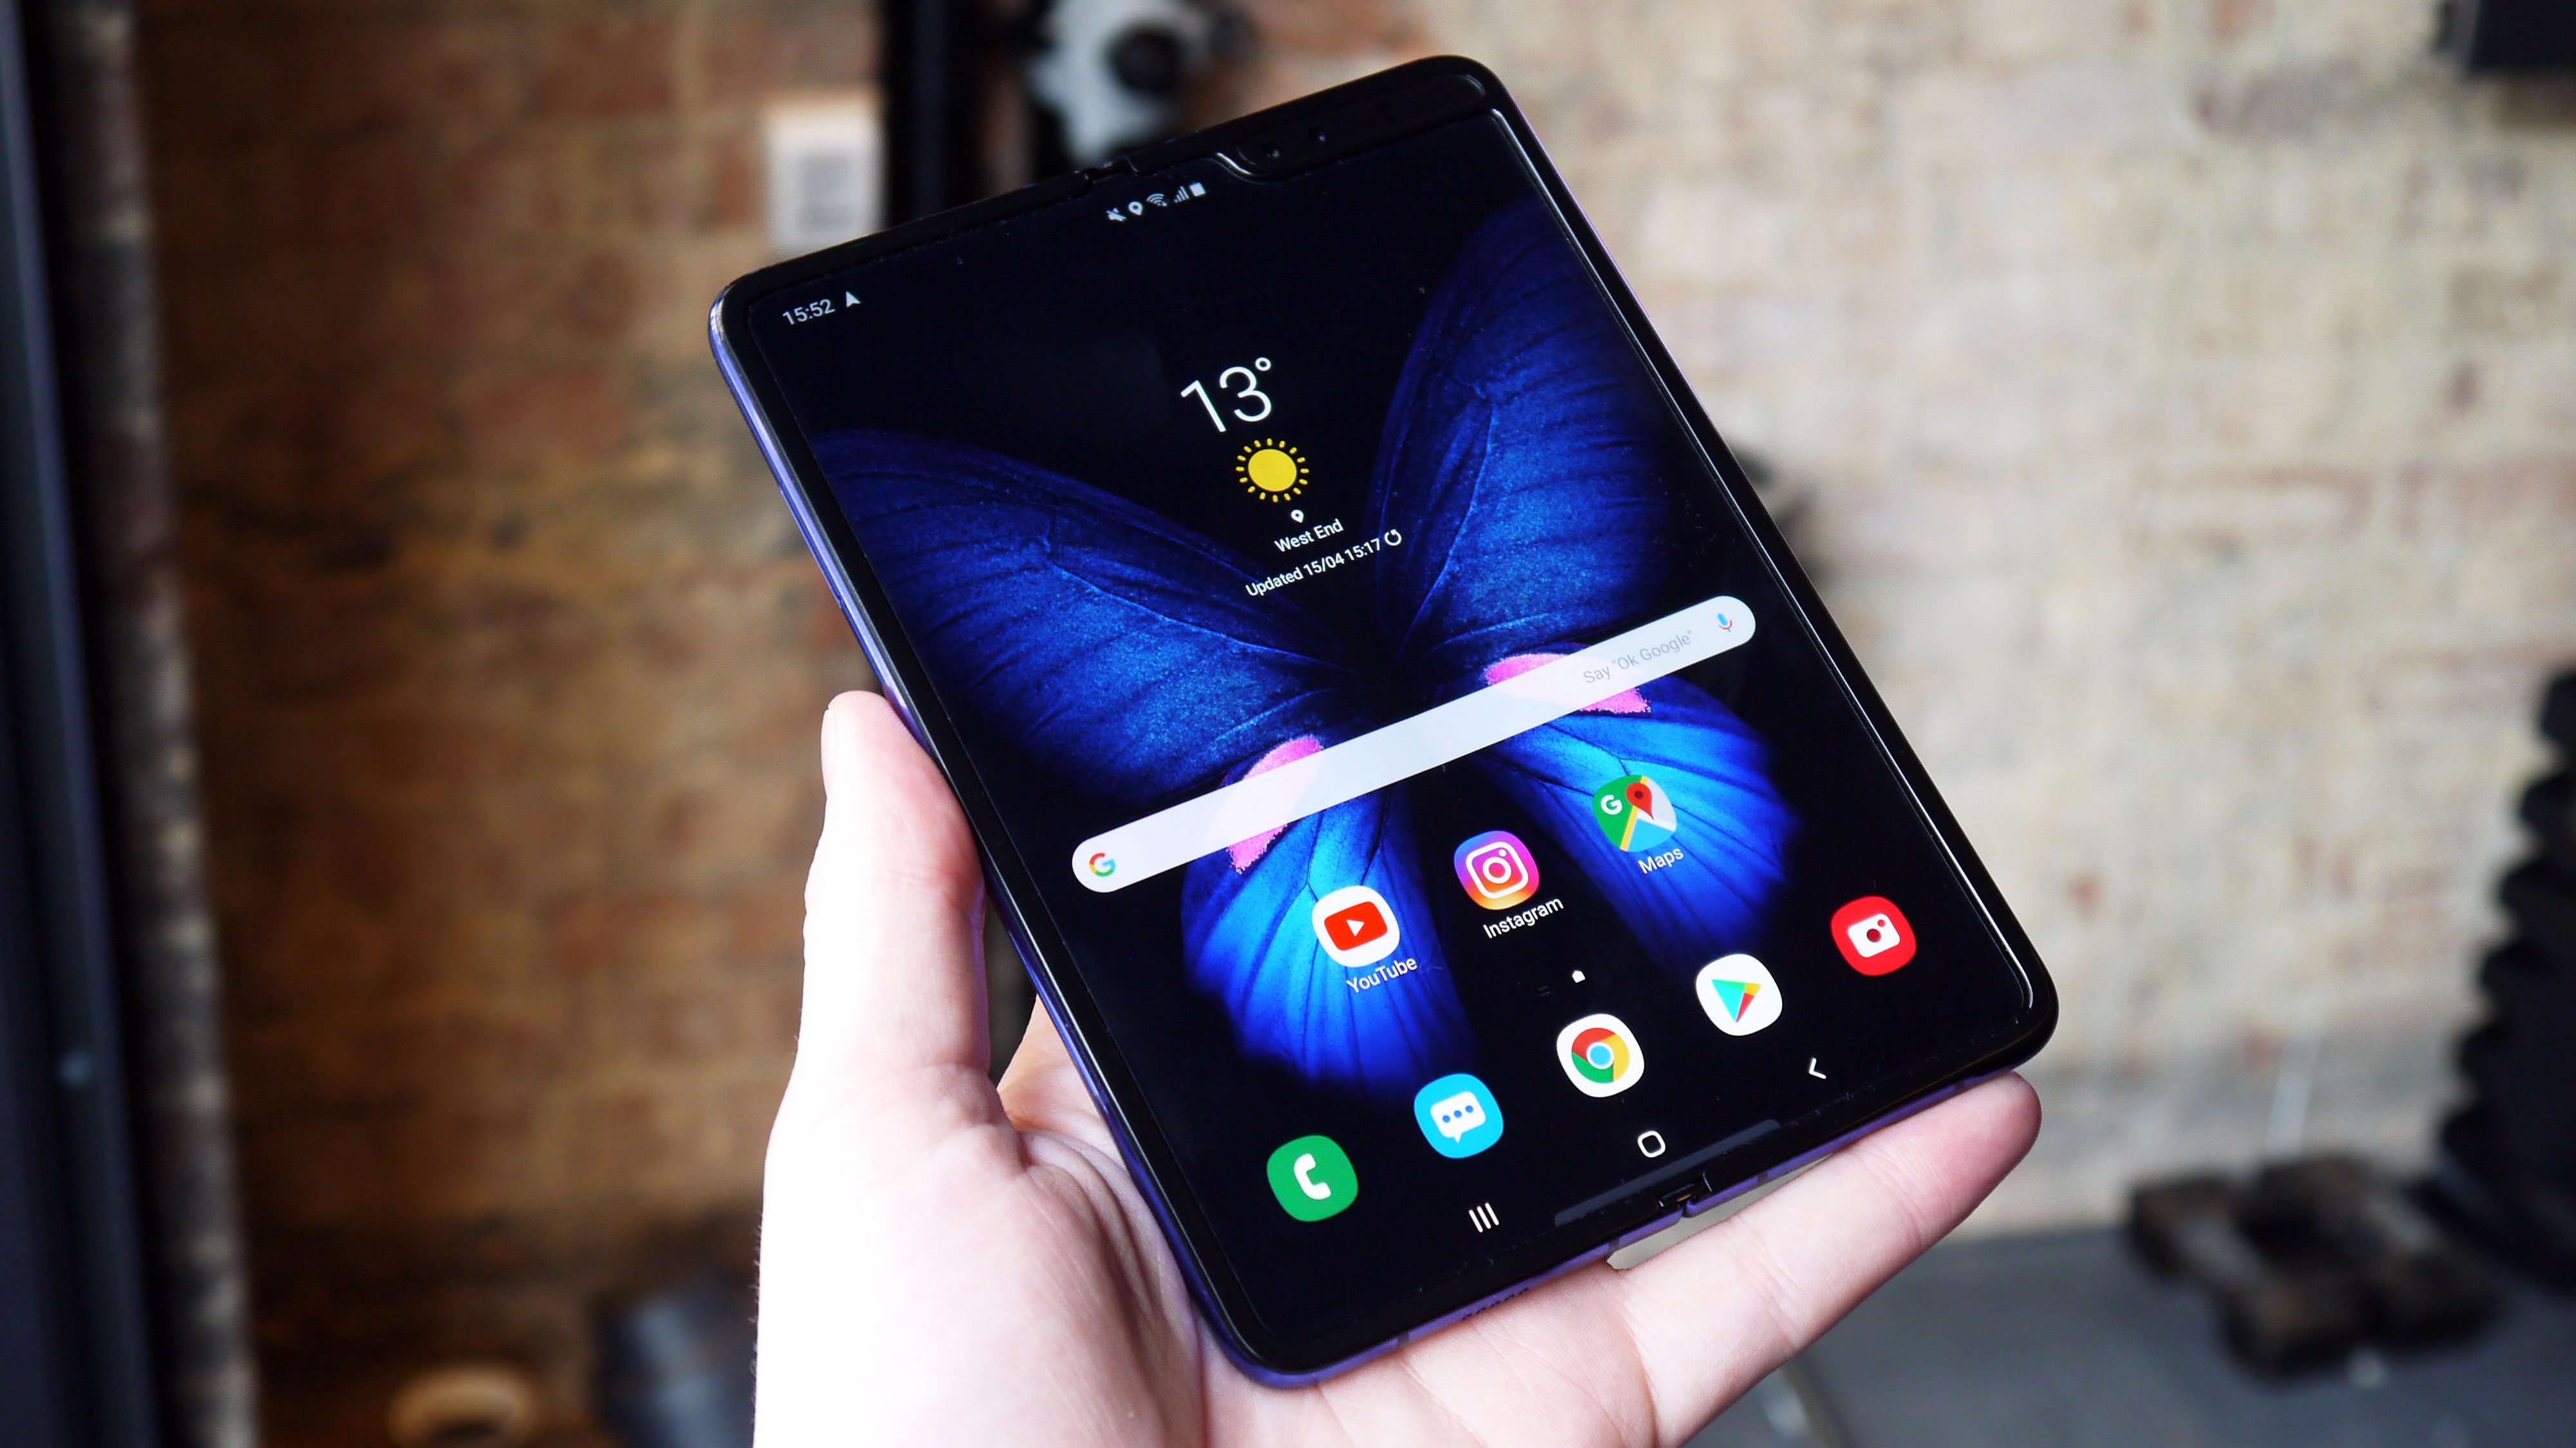 Samsung Galaxy Fold is now available in India